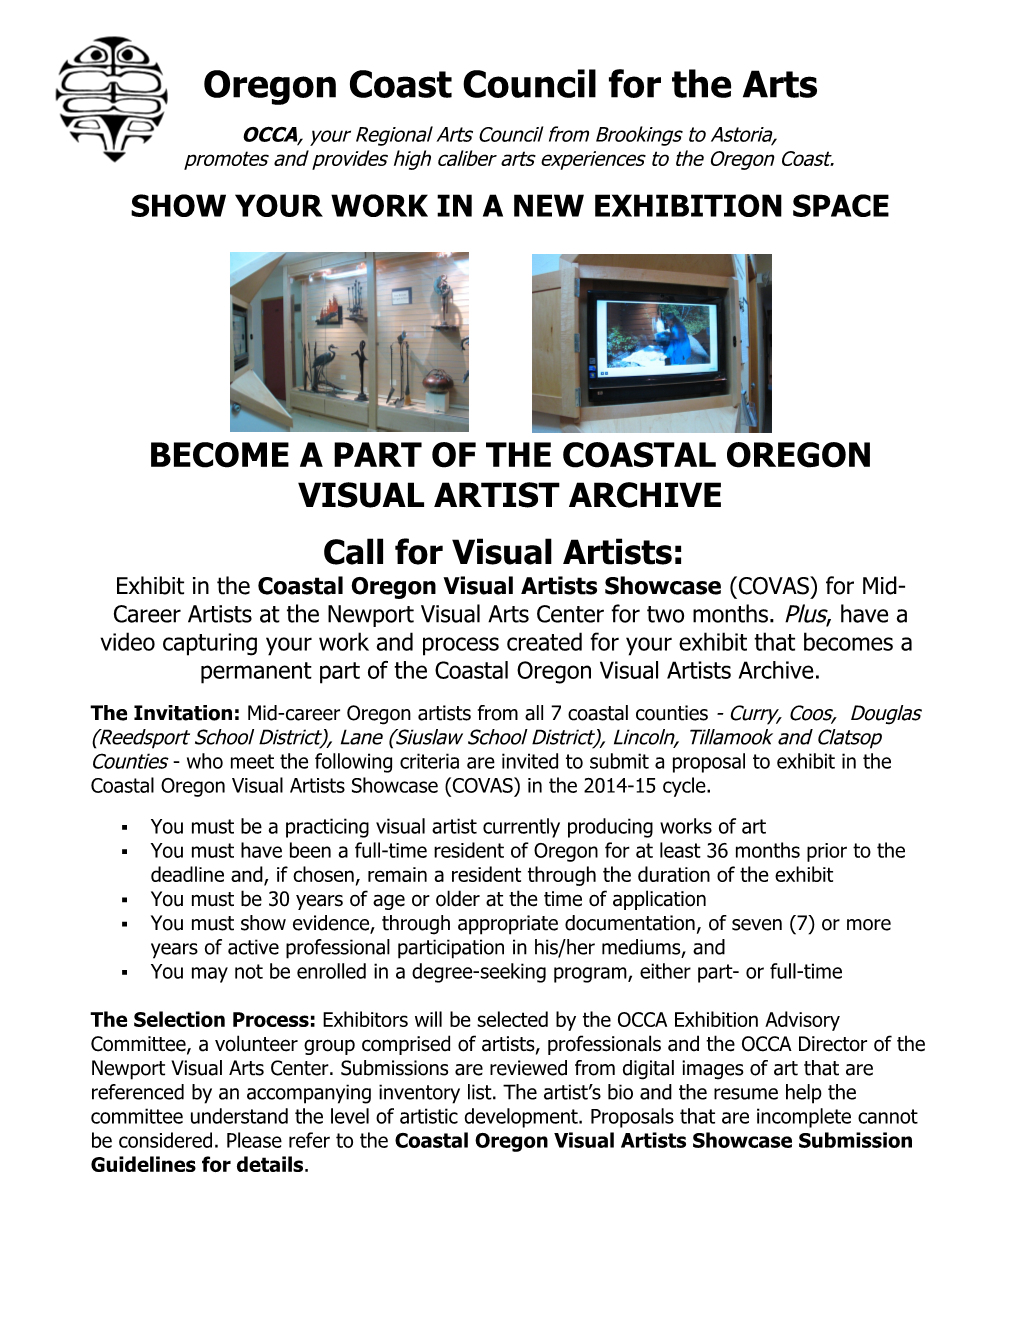 Show Your Work in a New Exhibition Space